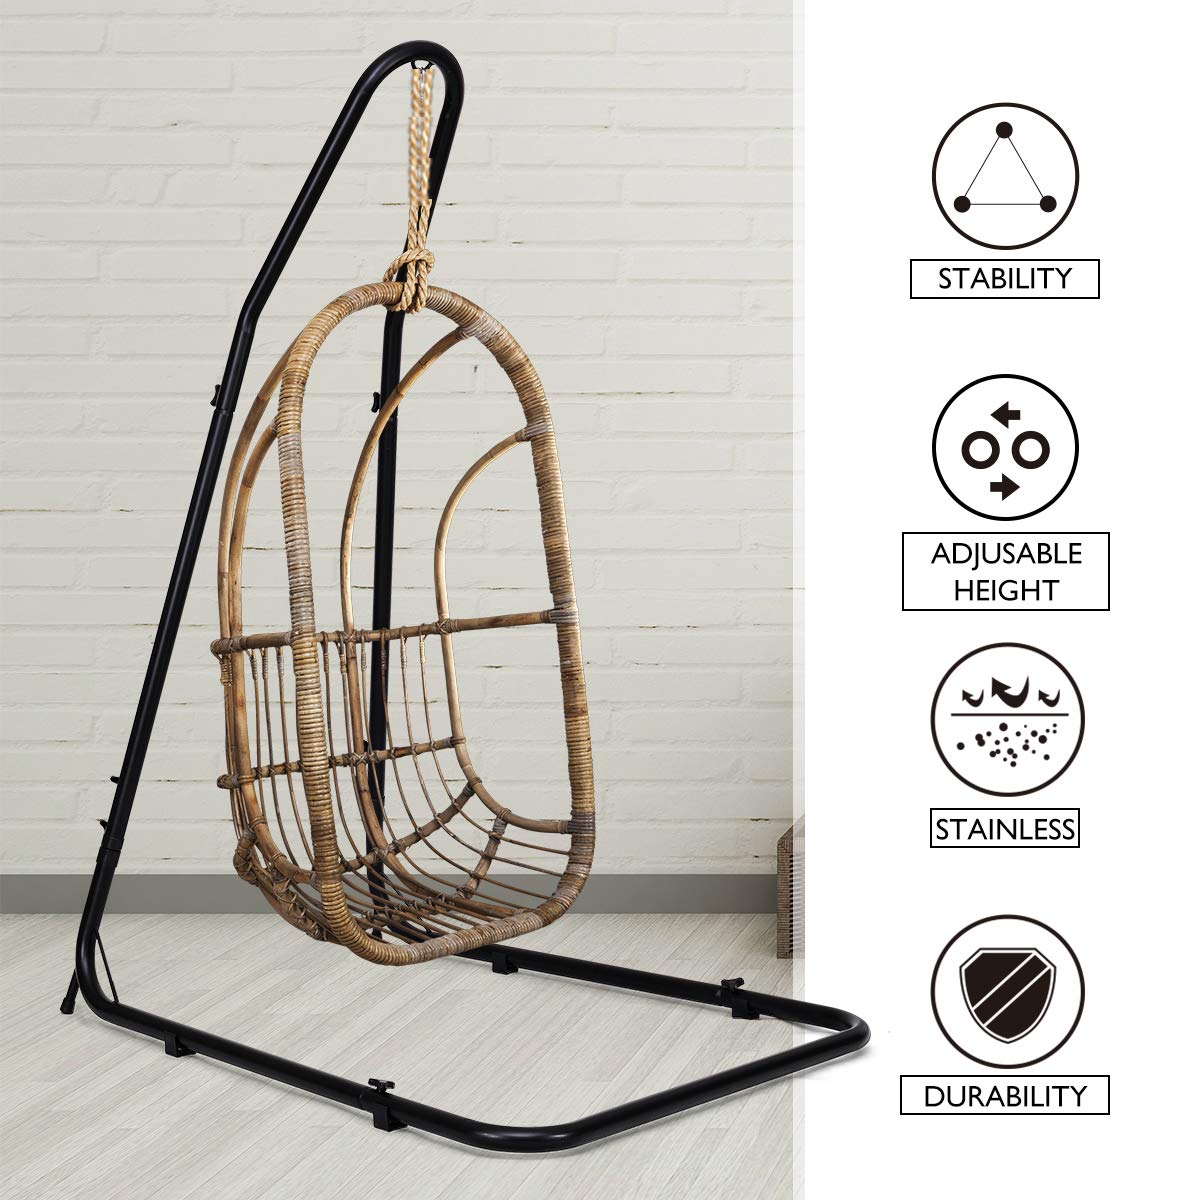 Steel Arc Hammock Stand for Hammock Chairs and Swings - Giantex